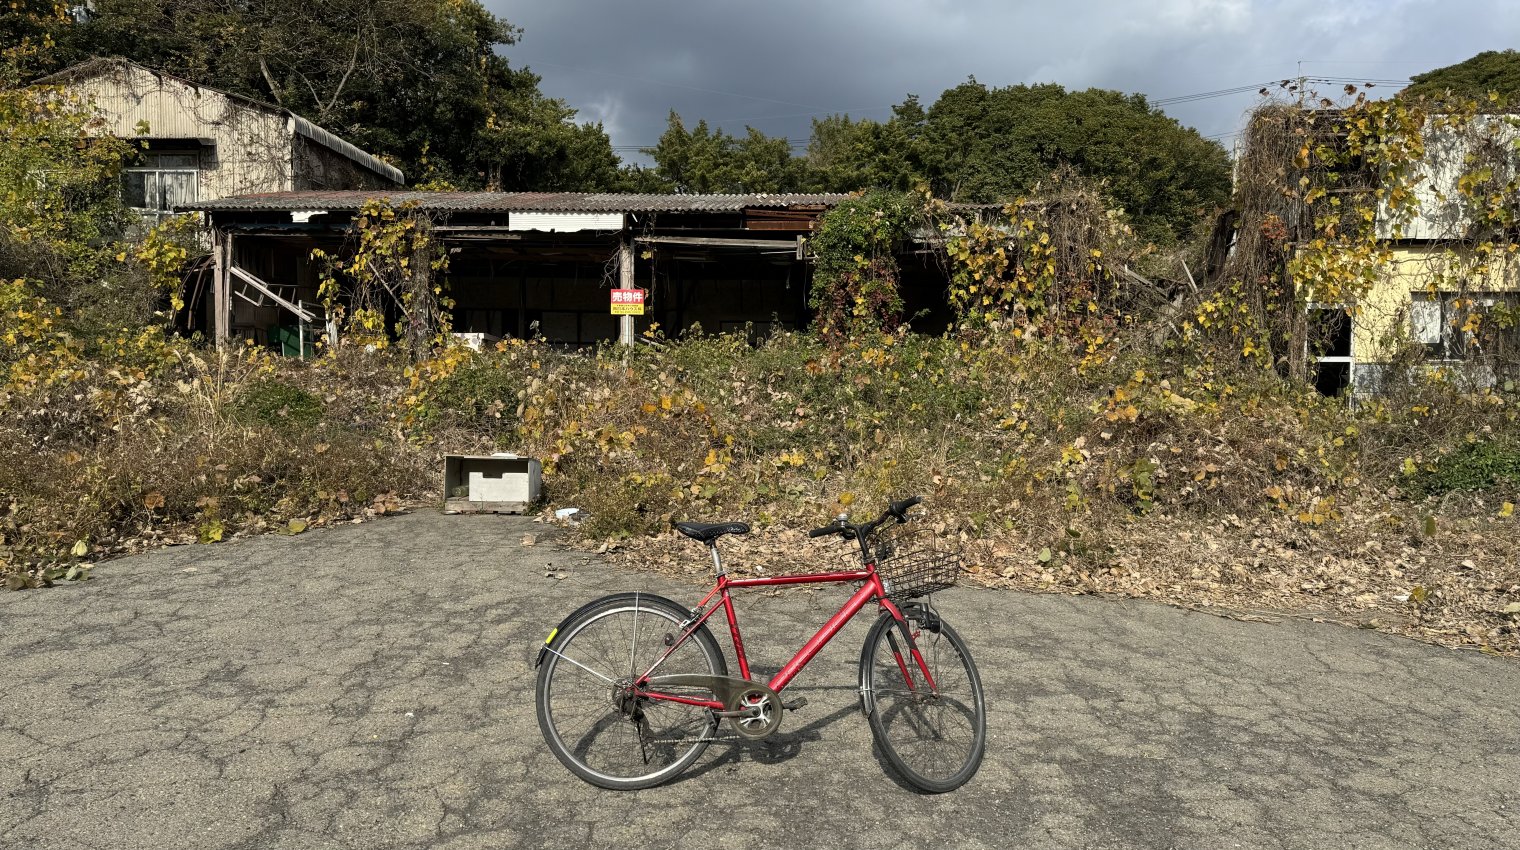 My rental bicycle in front of an abandoned house